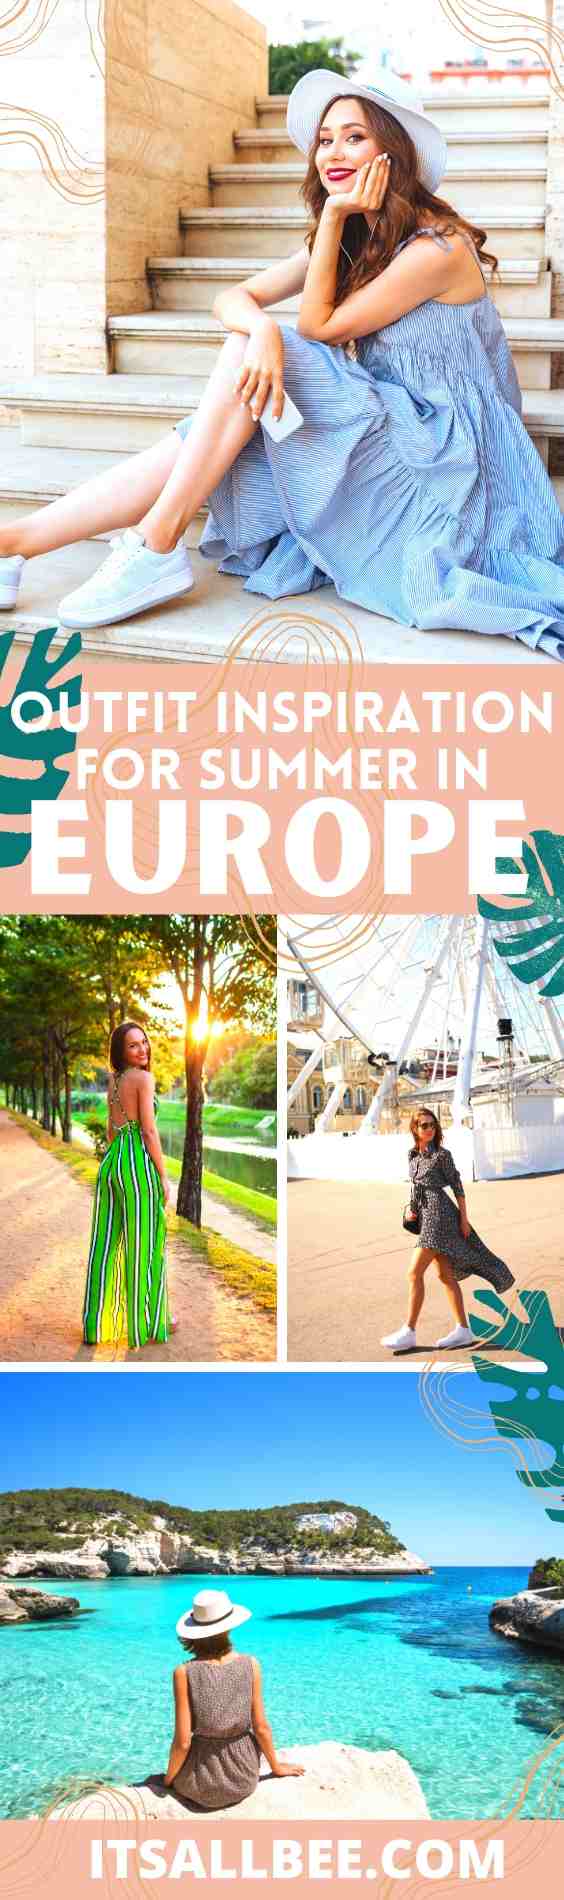 outfits for europe in summer 